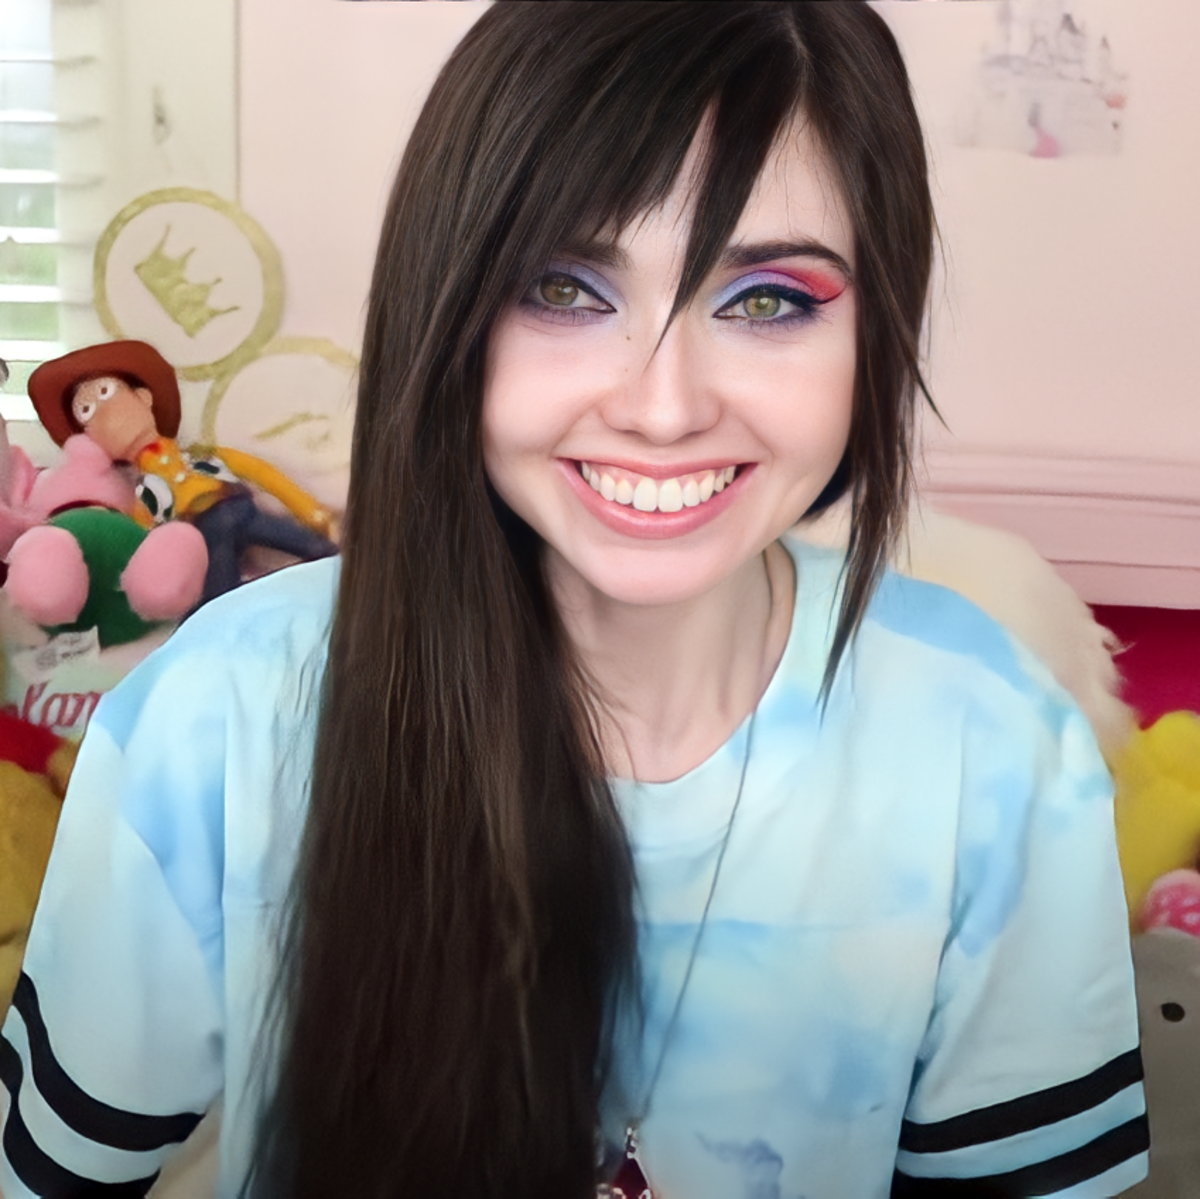 Journal Entry: Eugenia Cooney